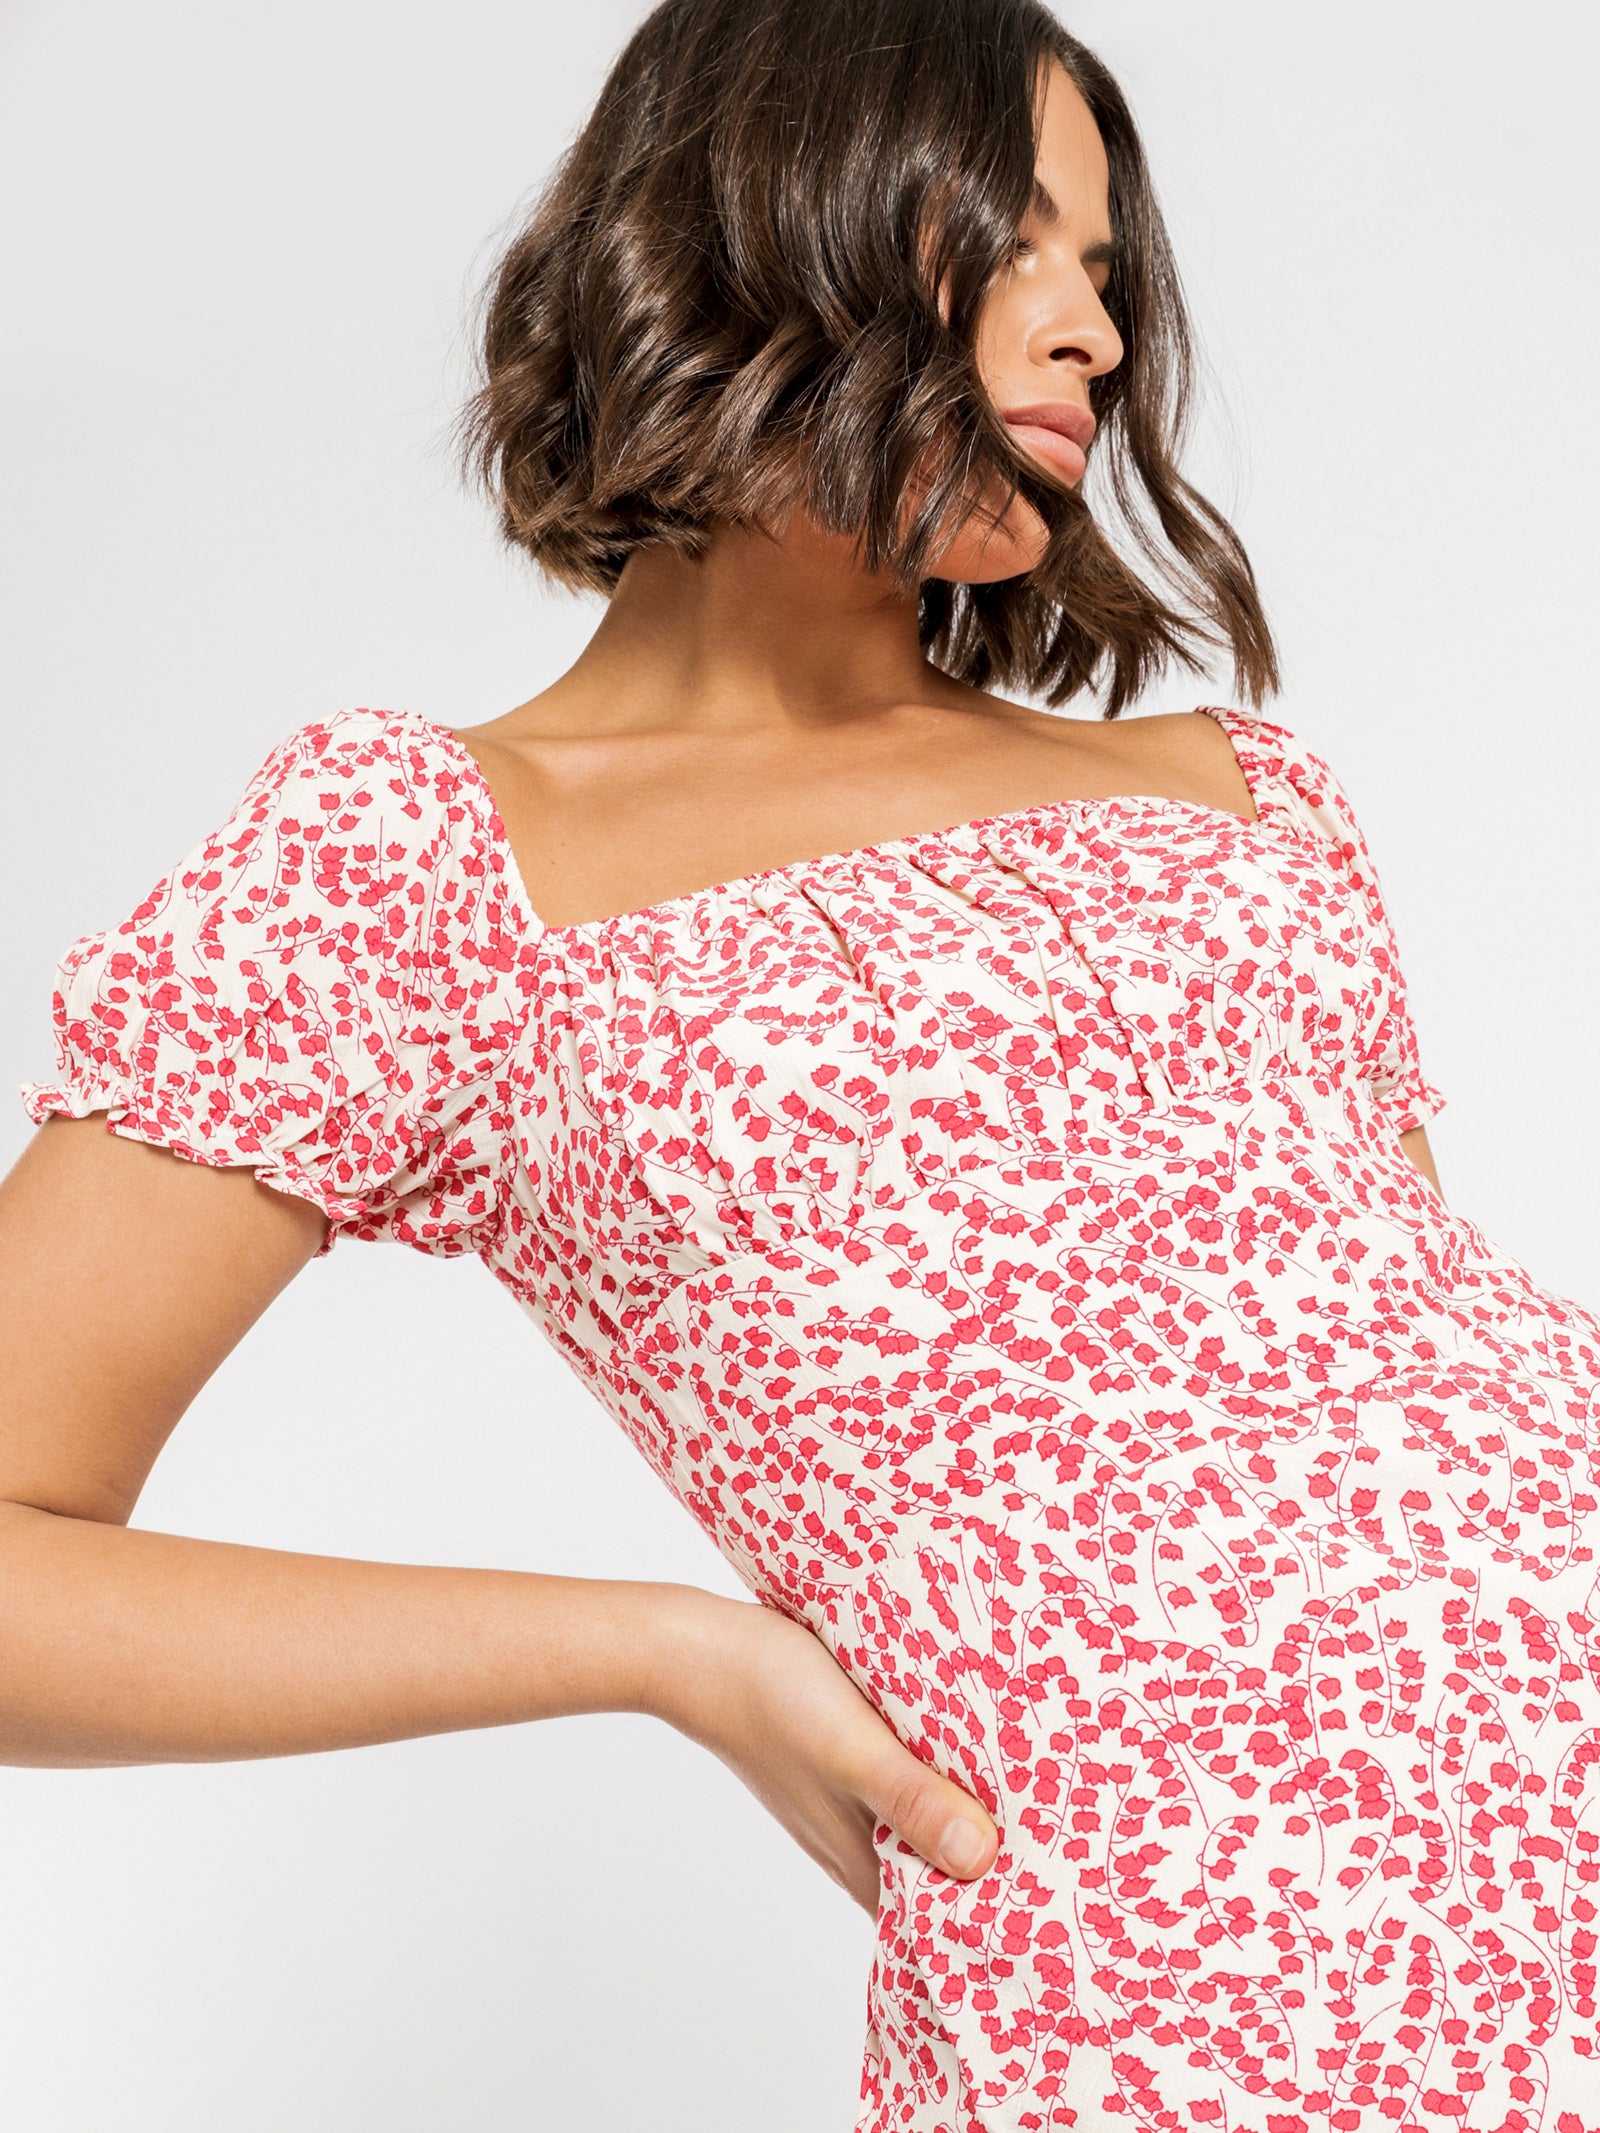 Neve Floral Midi Dress in Red & White